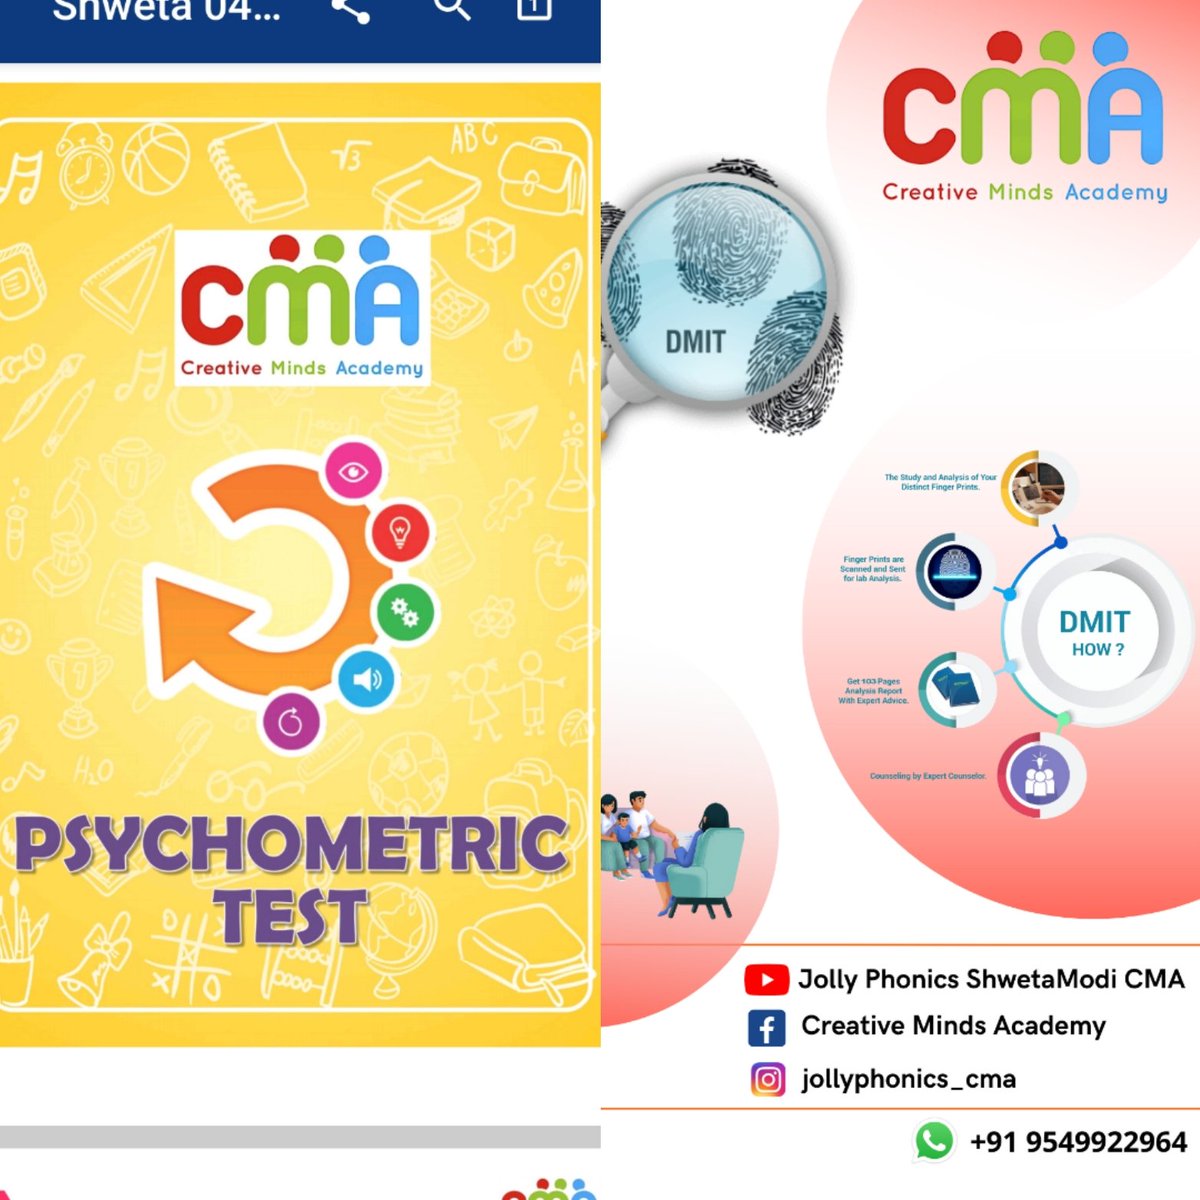 Type yes and get 50% off on DMIT report of your child 
#dmit #careercounselling #careerguidance #dmittest #careercounsellor #careerselection #streamselection #careerguide #careercounseling #career #midbrain #multipleintelligence  #midbrainactivation